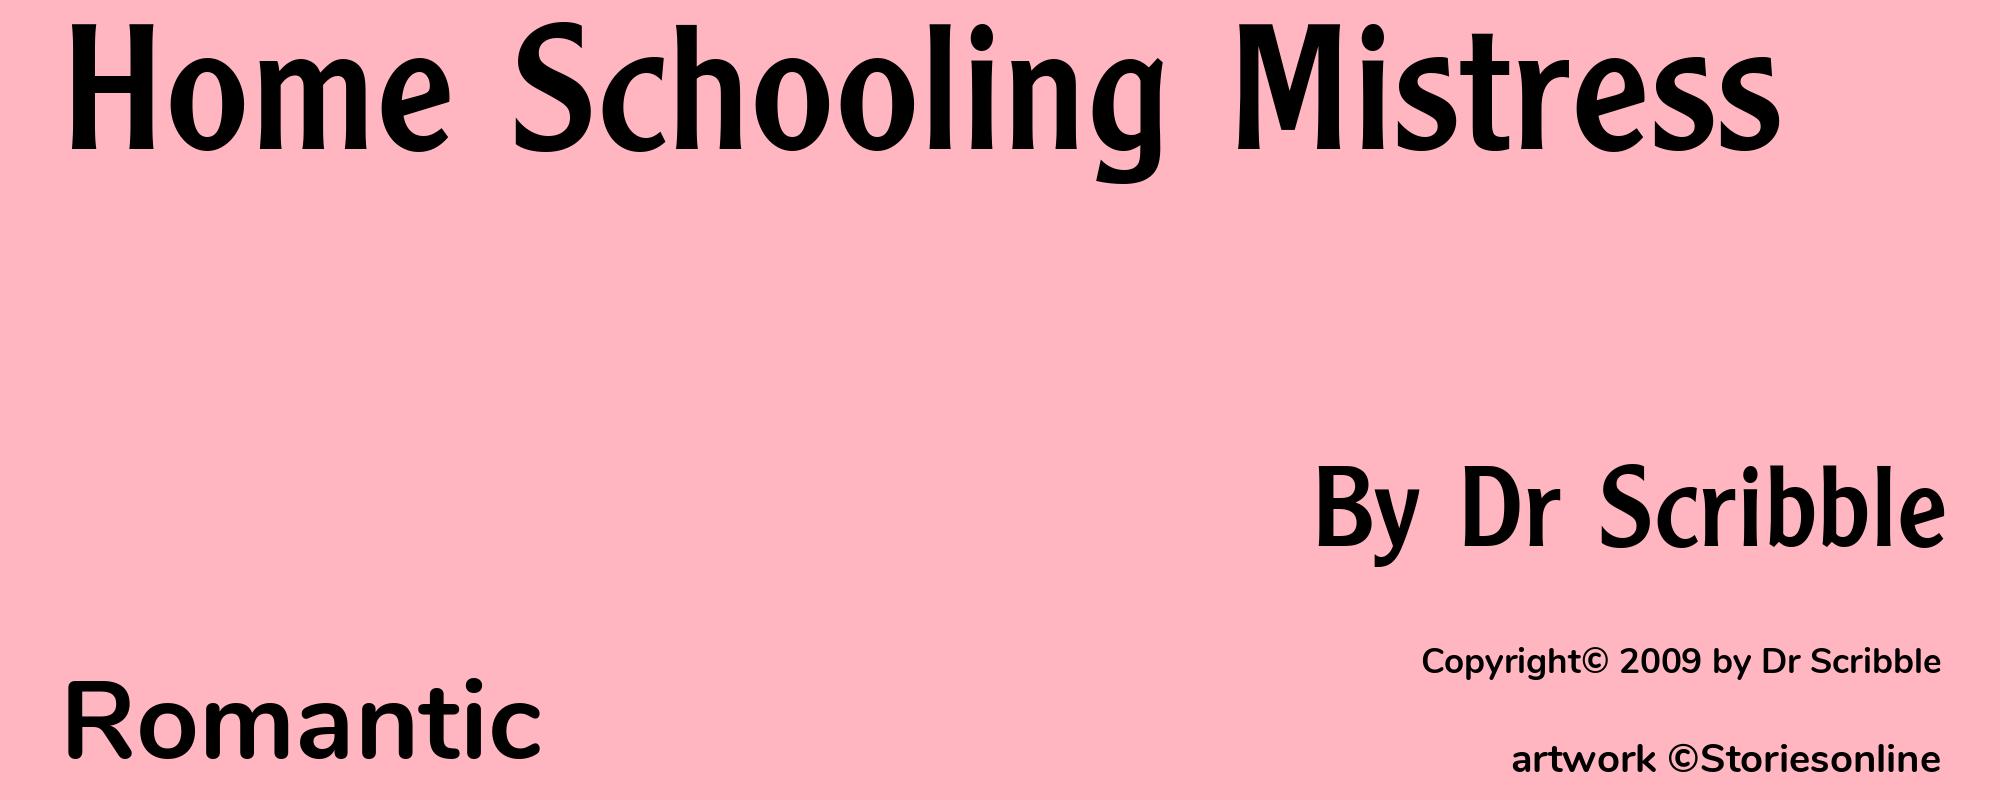 Home Schooling Mistress - Cover